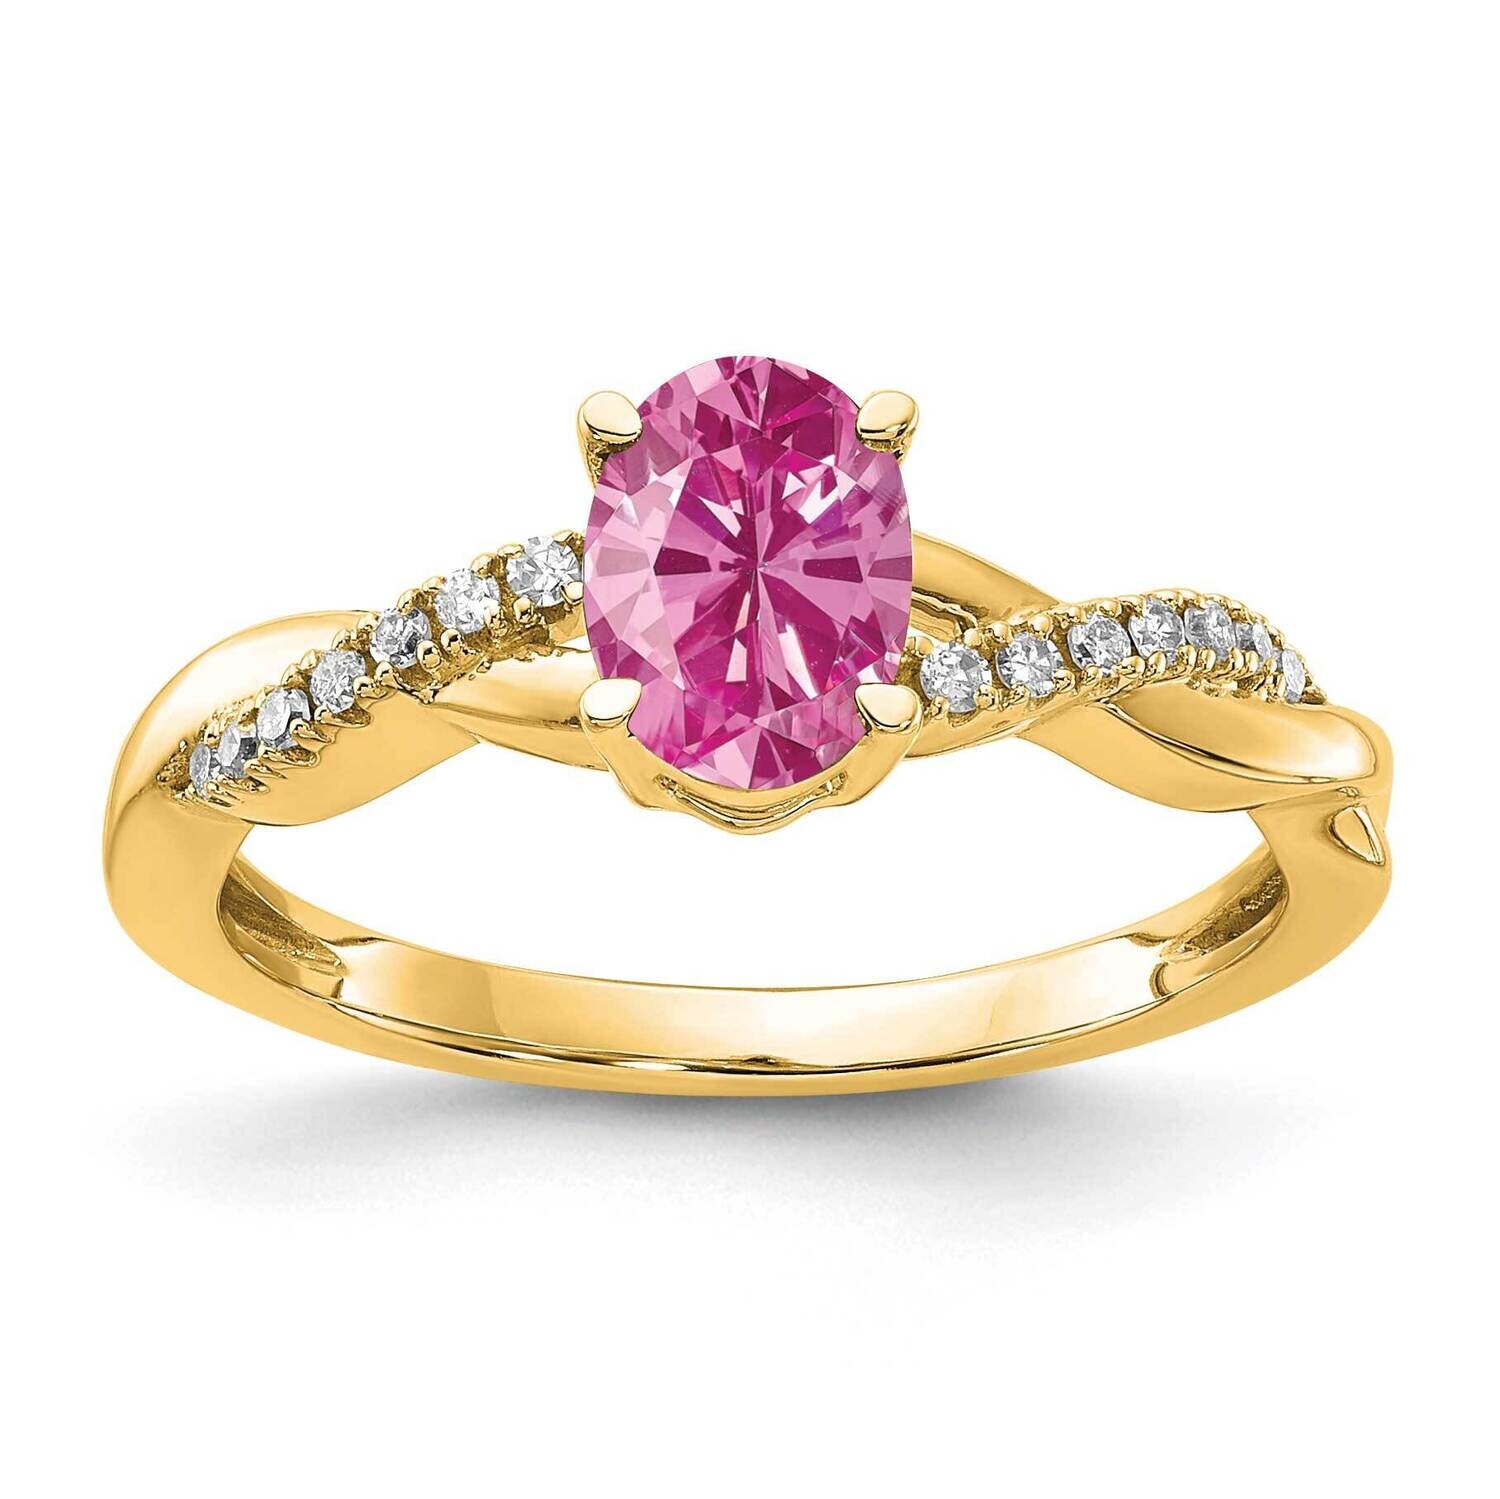 Oval Created Pink Sapphire Diamond Ring 14k Gold RM4235-CPS-008-YA